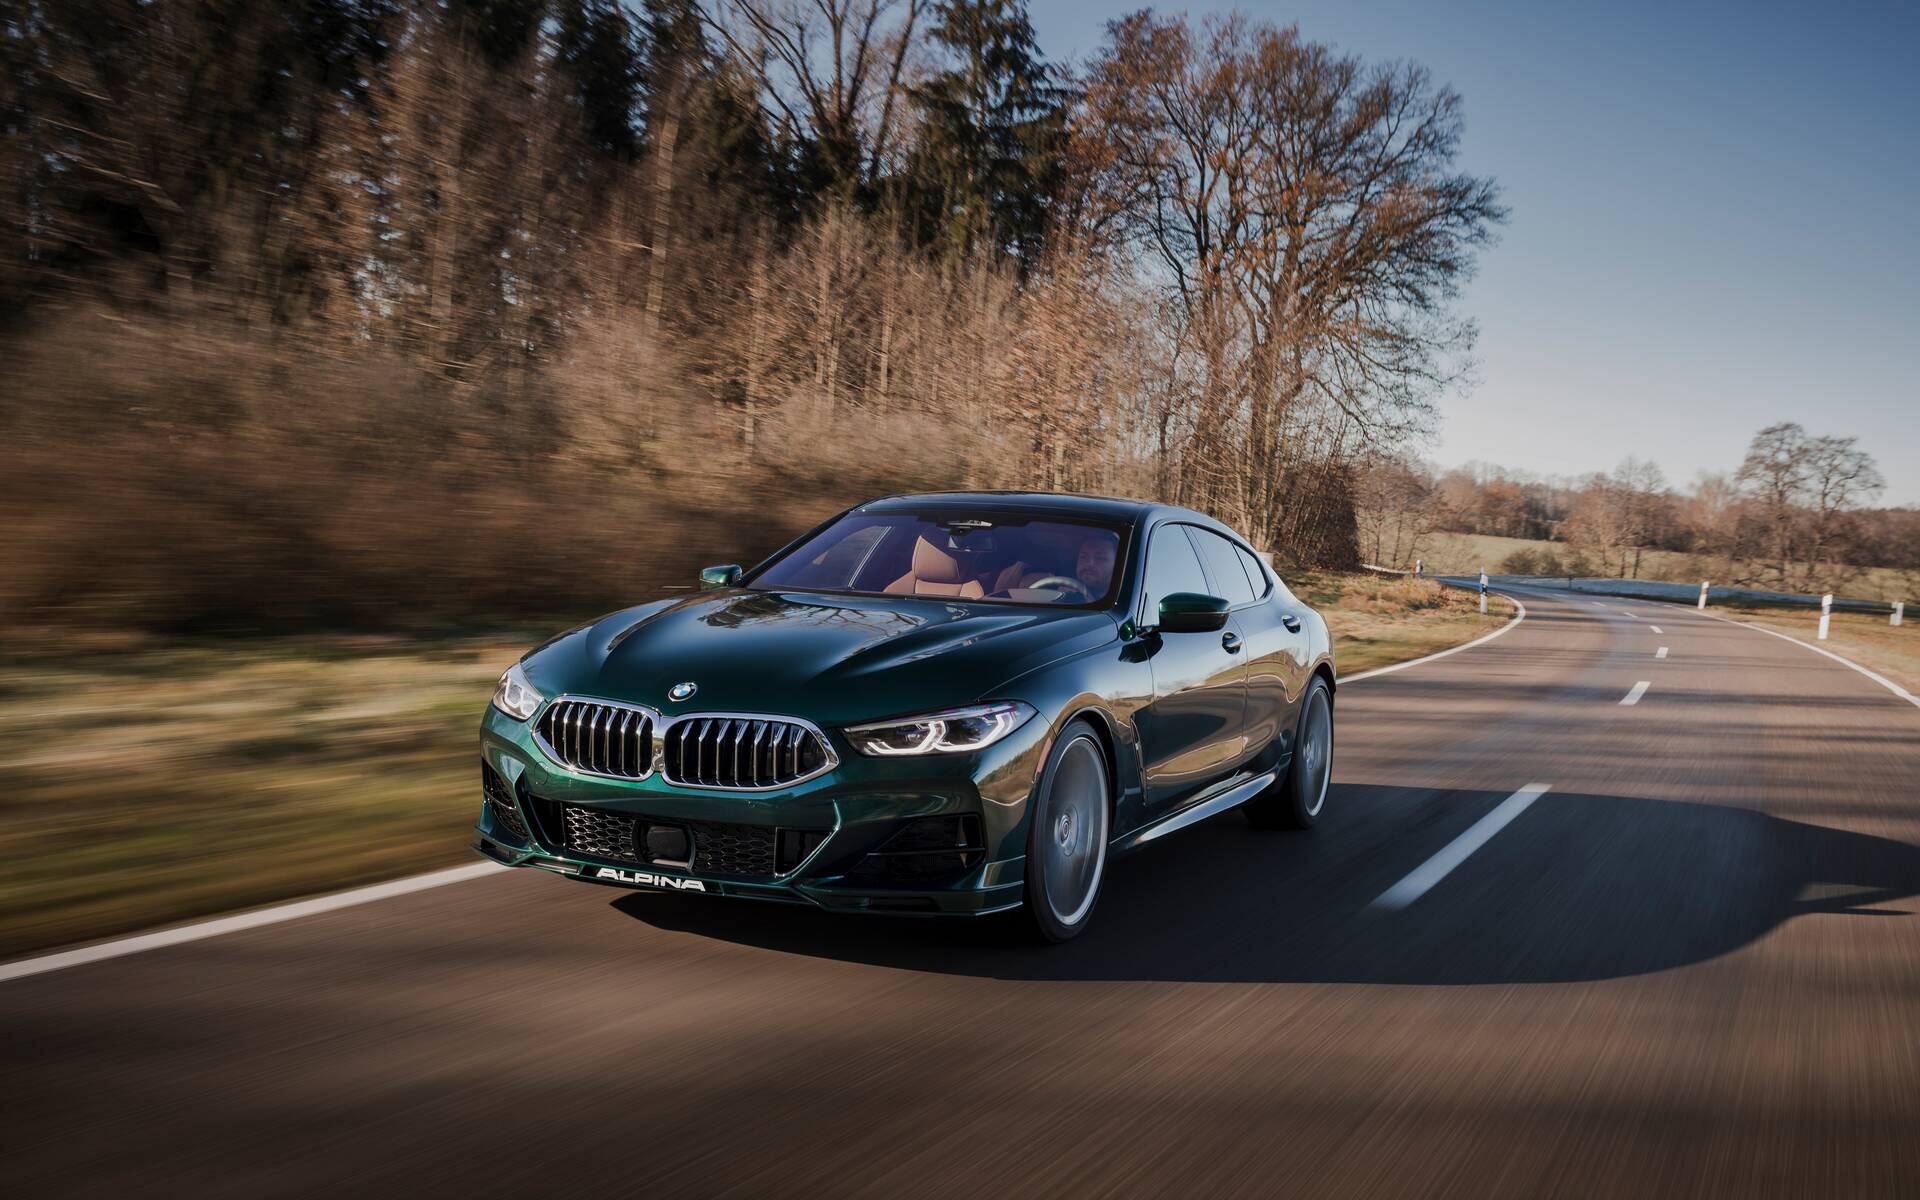 2022 BMW Alpina B8 Gran Coupe: Meet Germany's Everest - The Car Guide